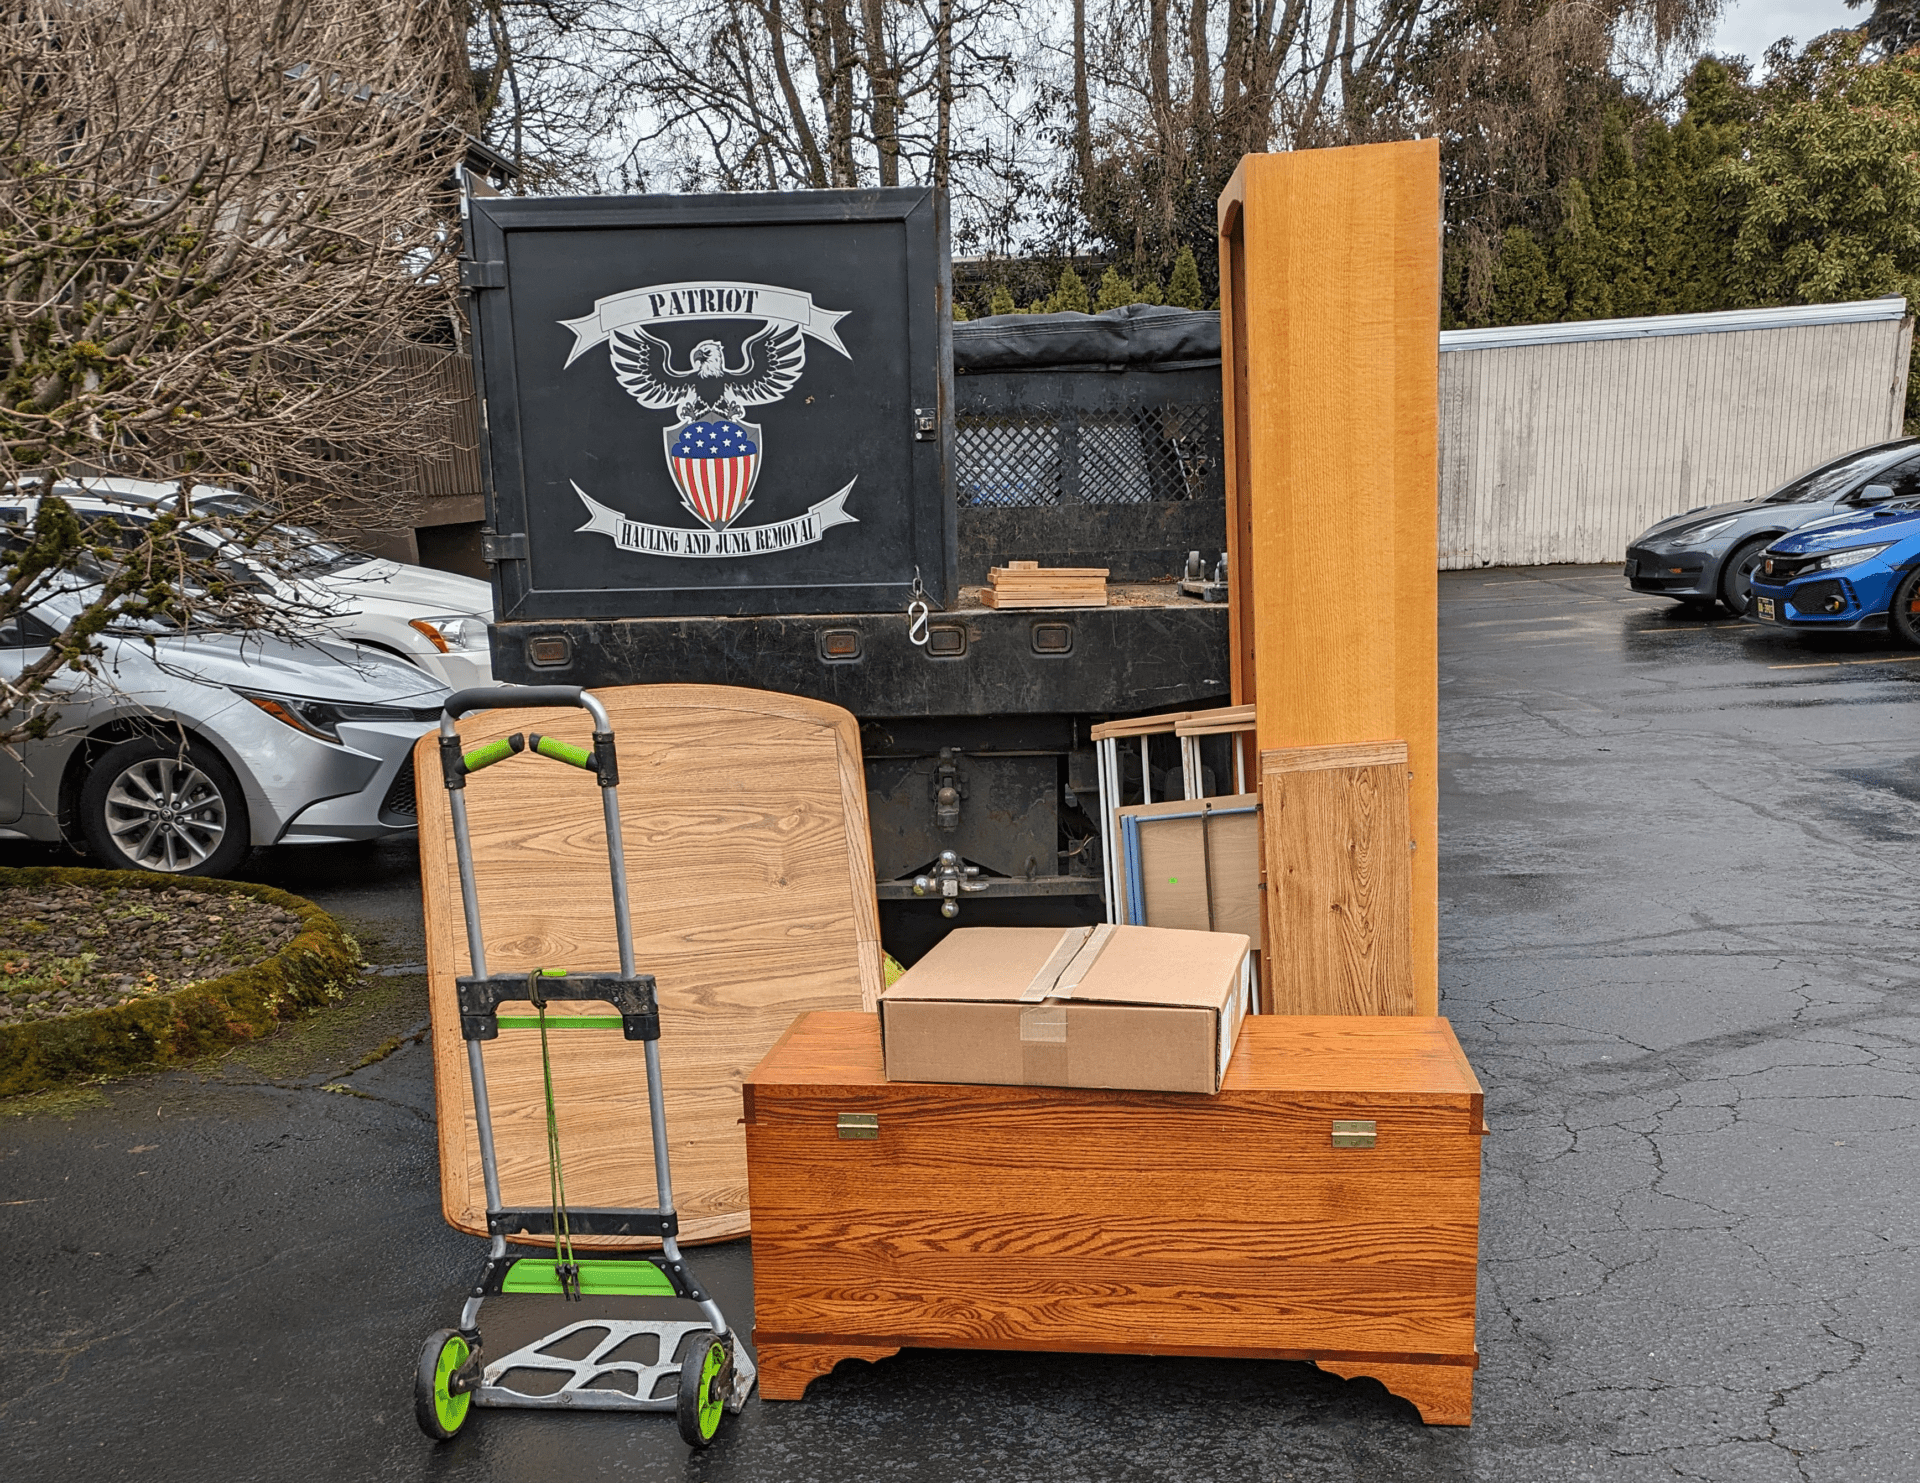 One call to Patriot Hauling & Junk Removal to haul away furniture 